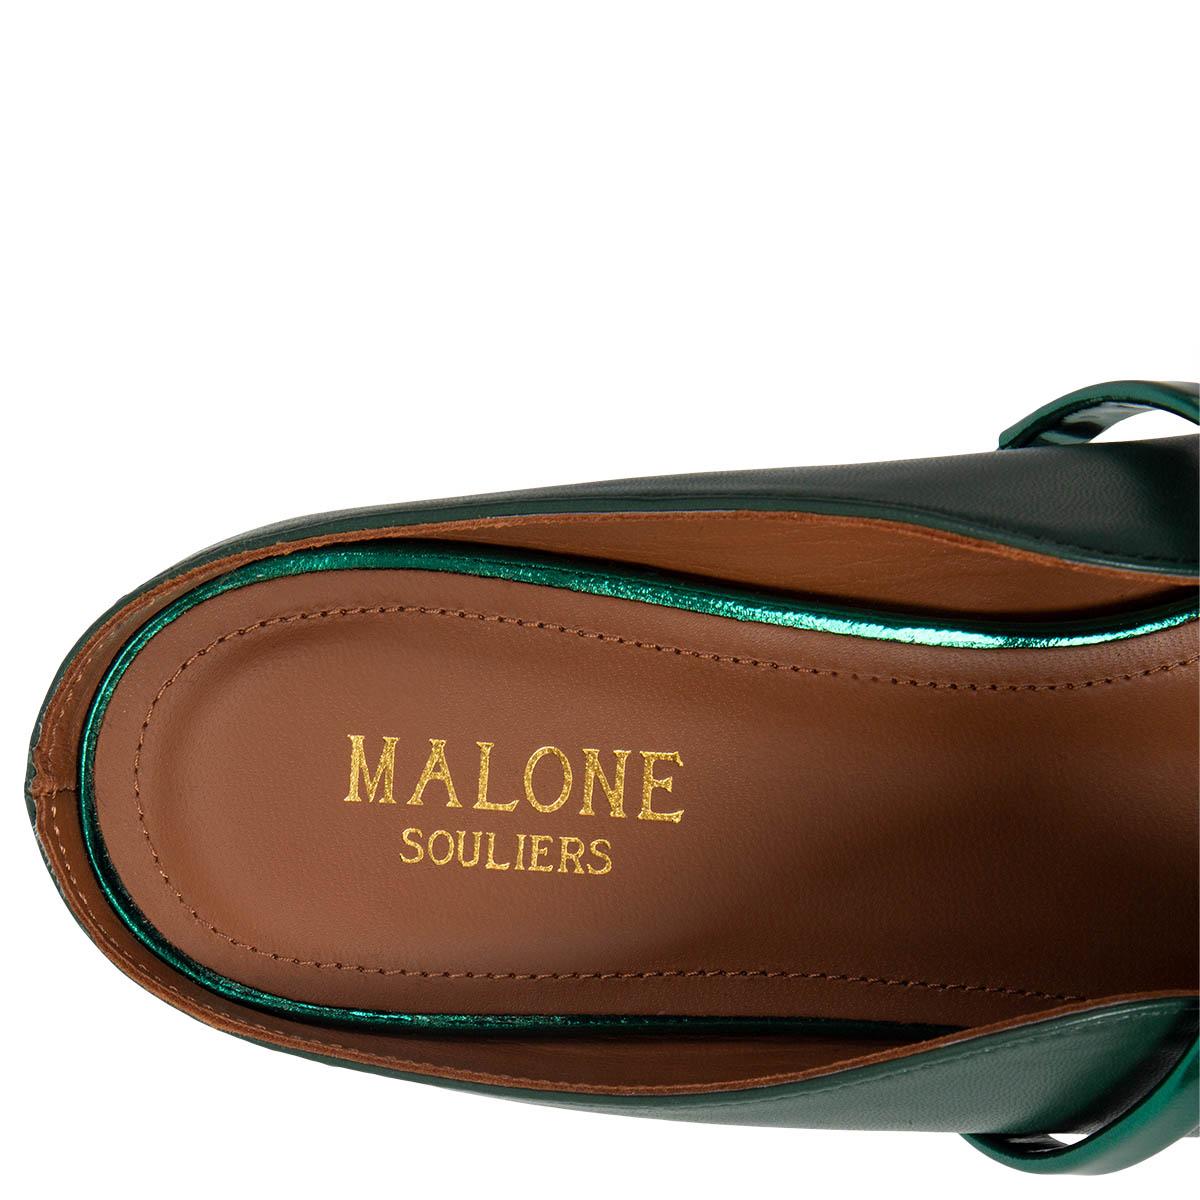 Black MALONE SOULIERS dark green leather & metallic MAUREEN Ballet Flats Shoes 38 For Sale